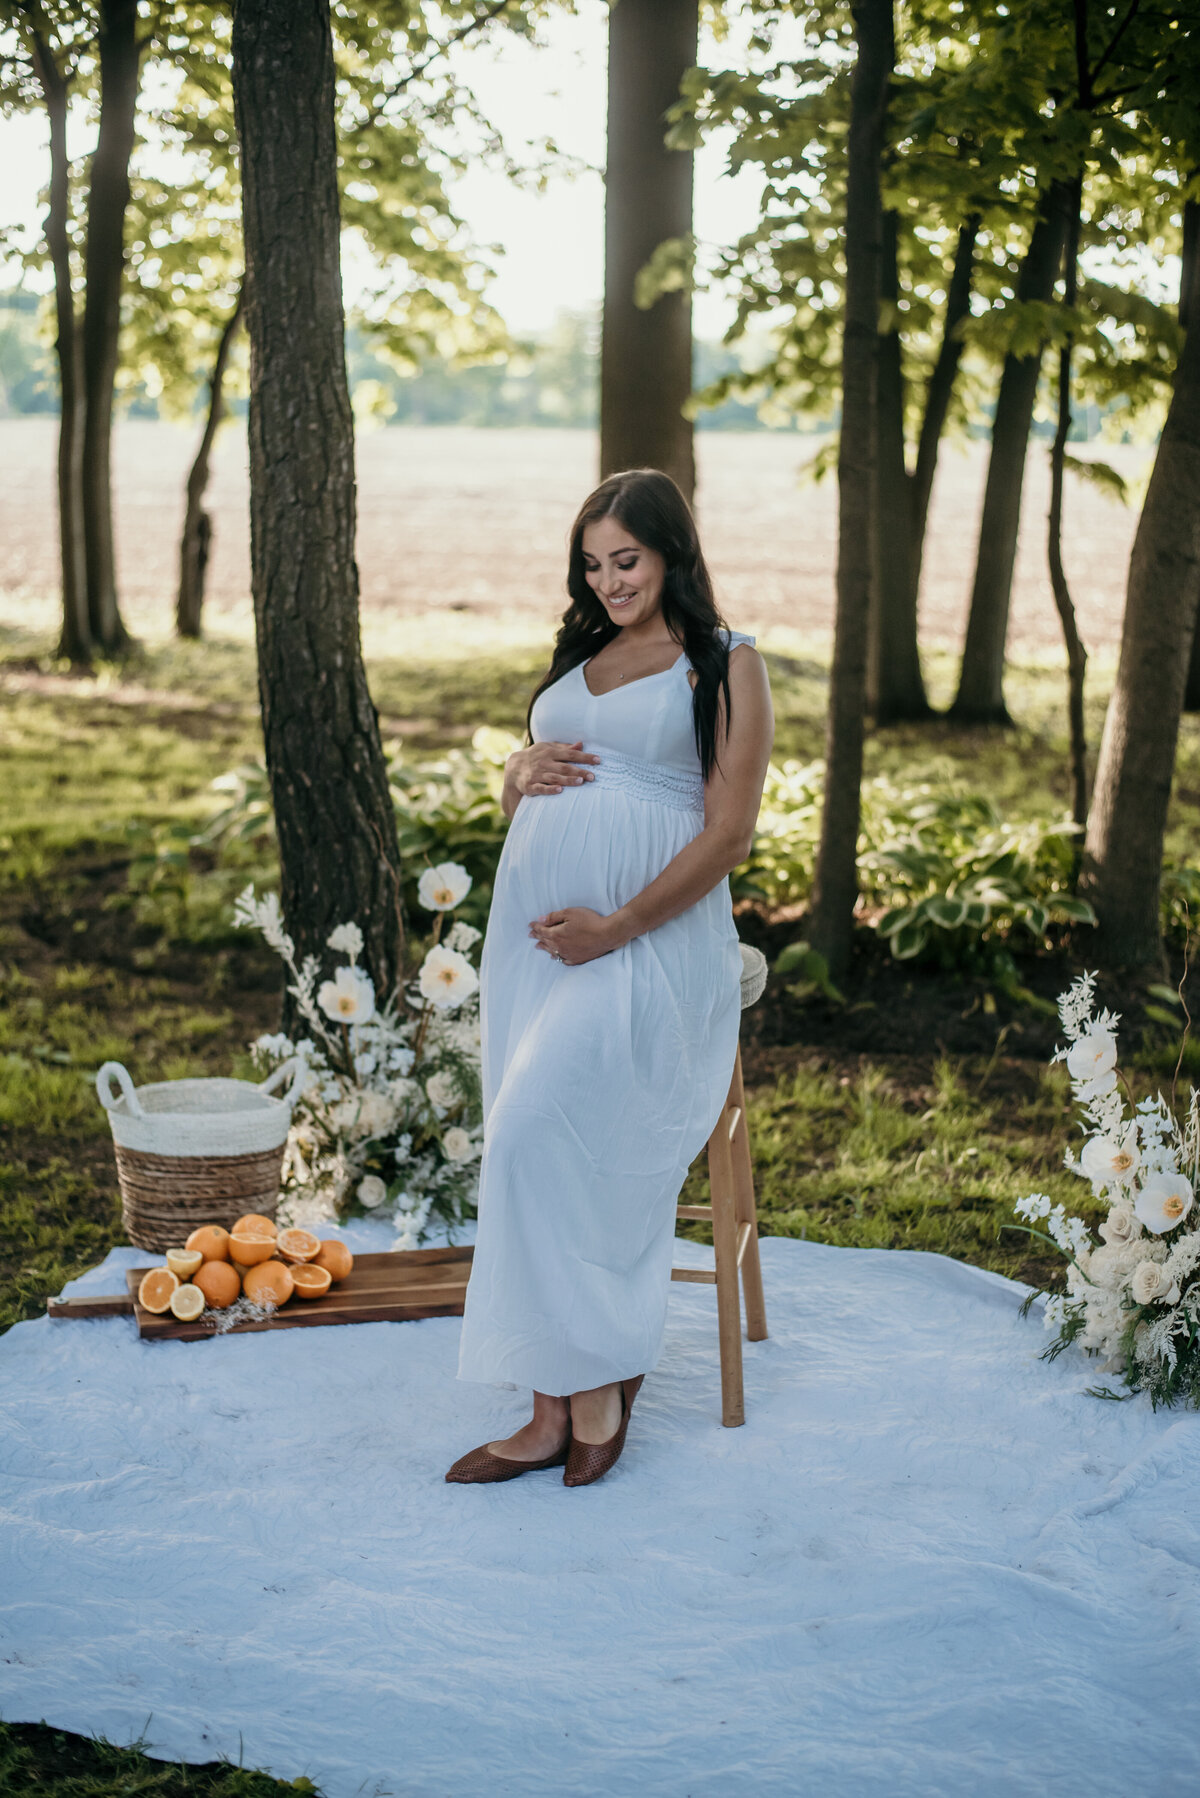 Woman in maternity photoshoot